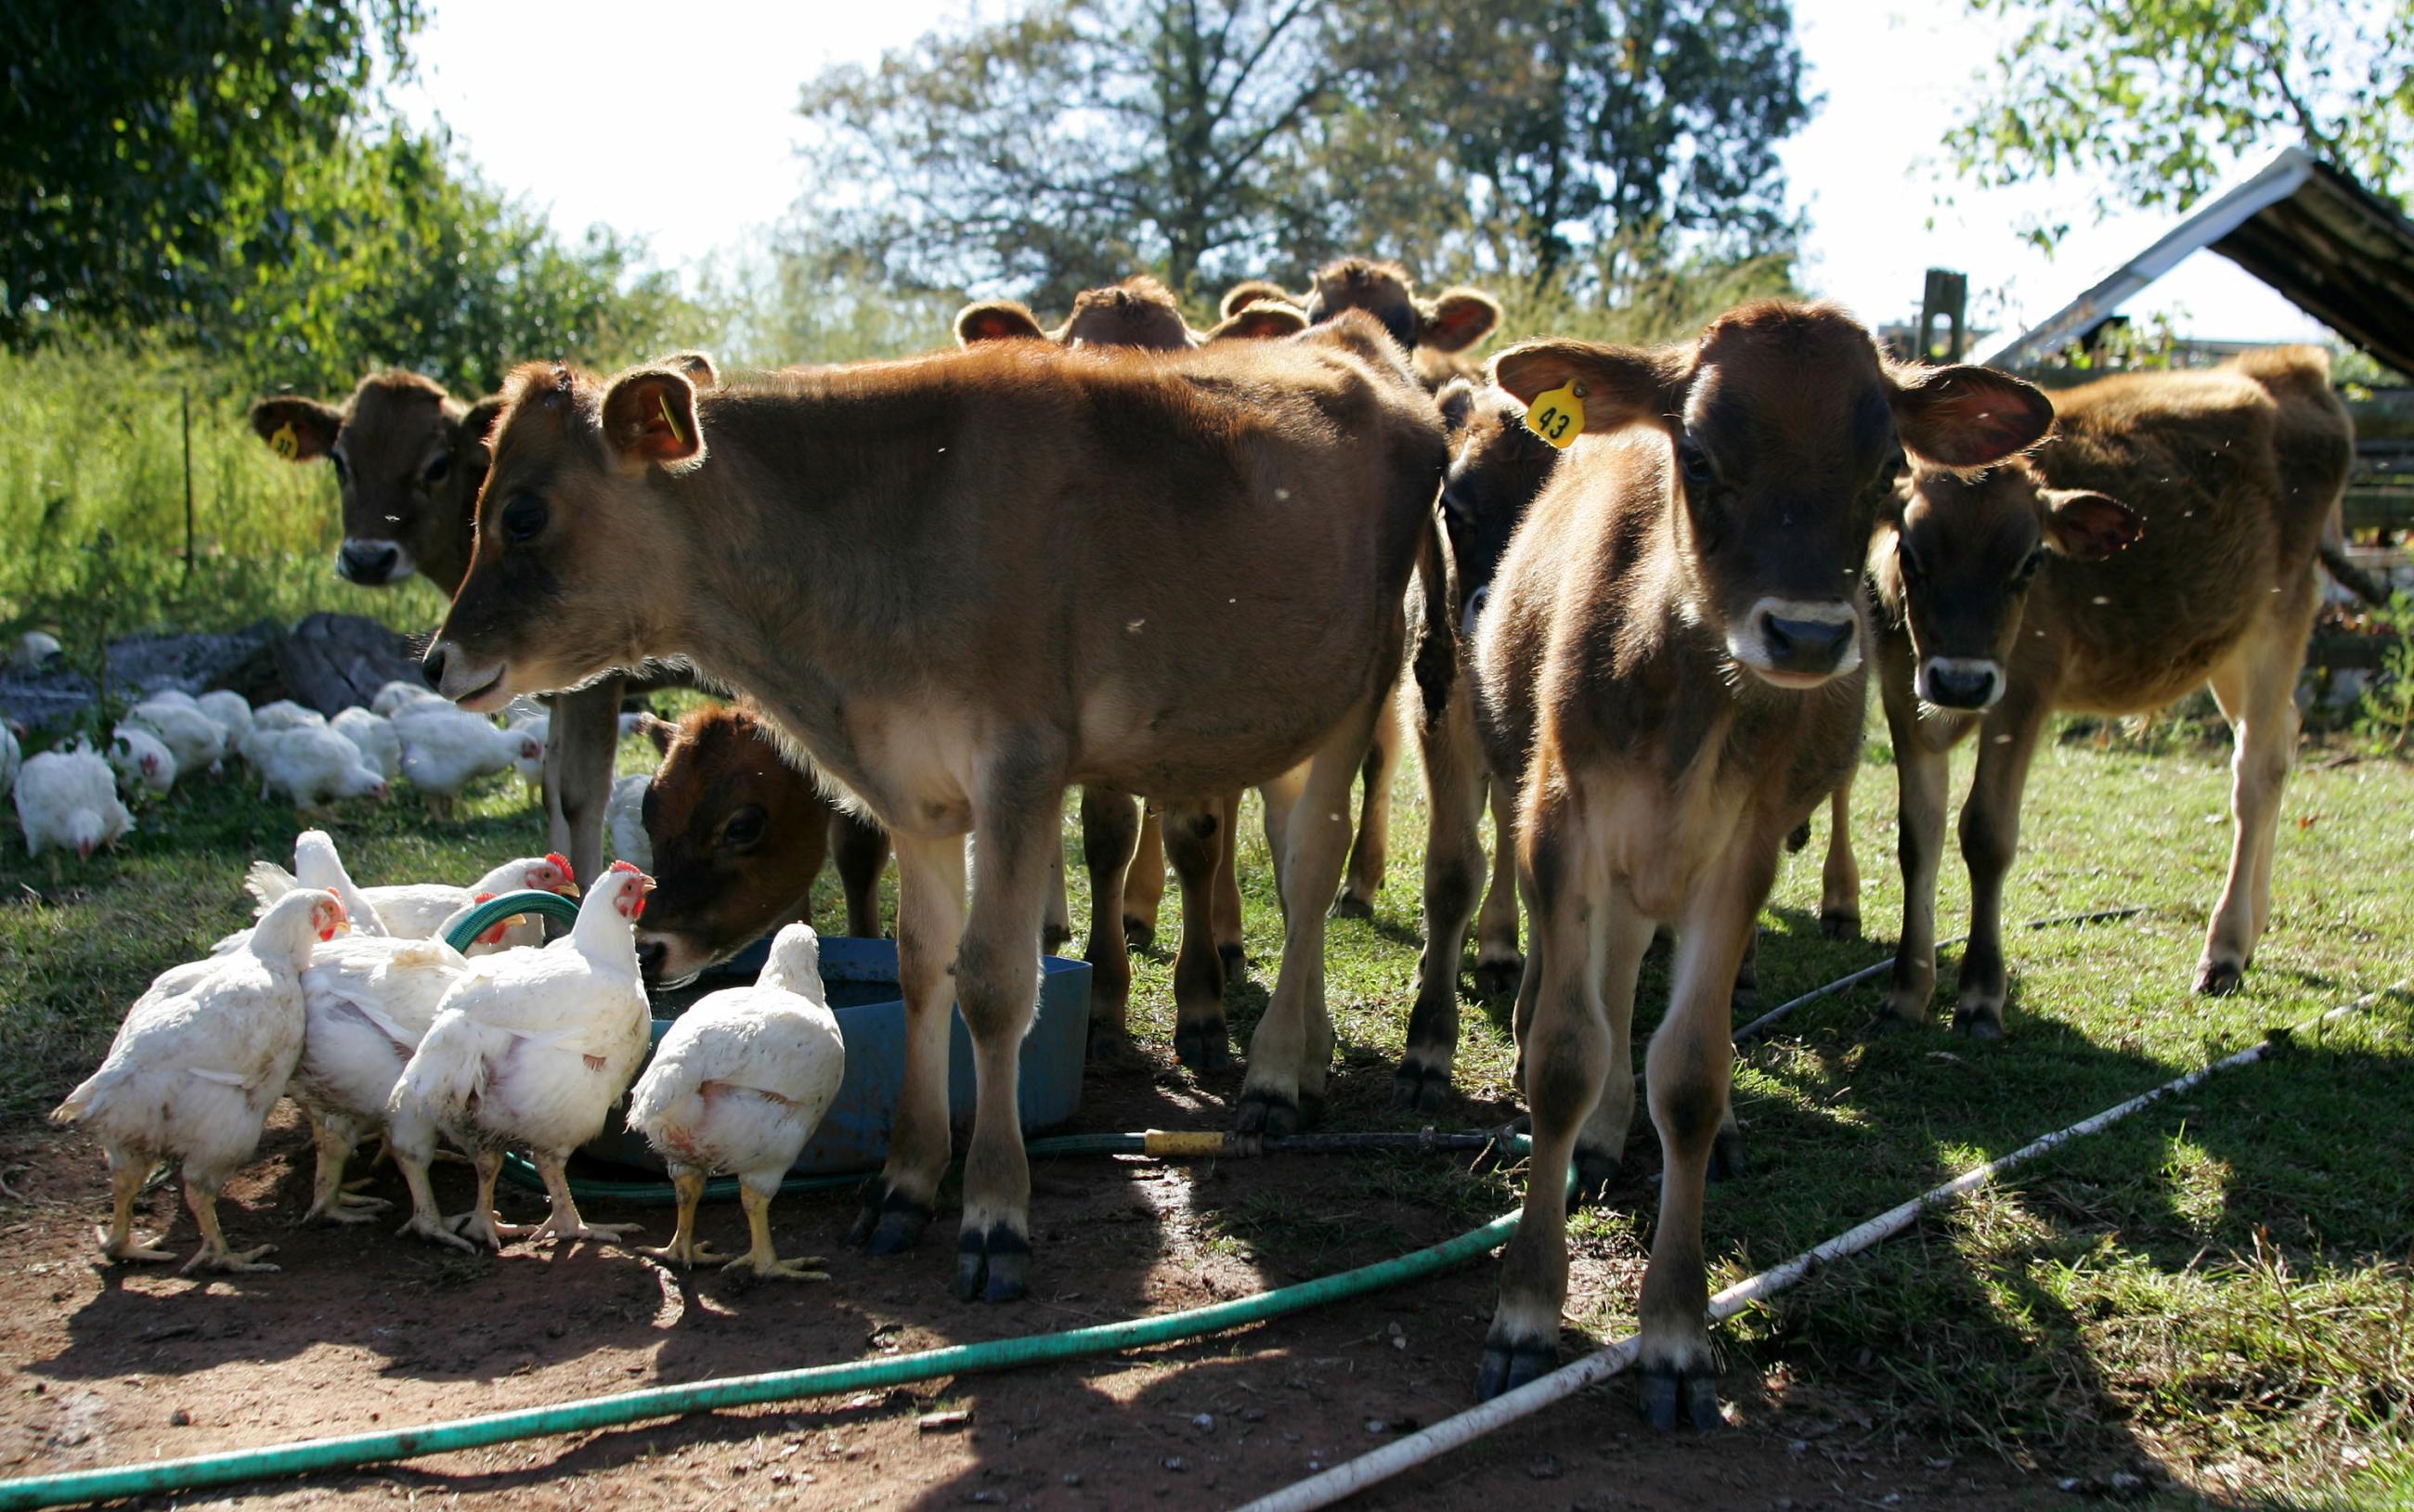 Chickens drink water next to calves on a farm.